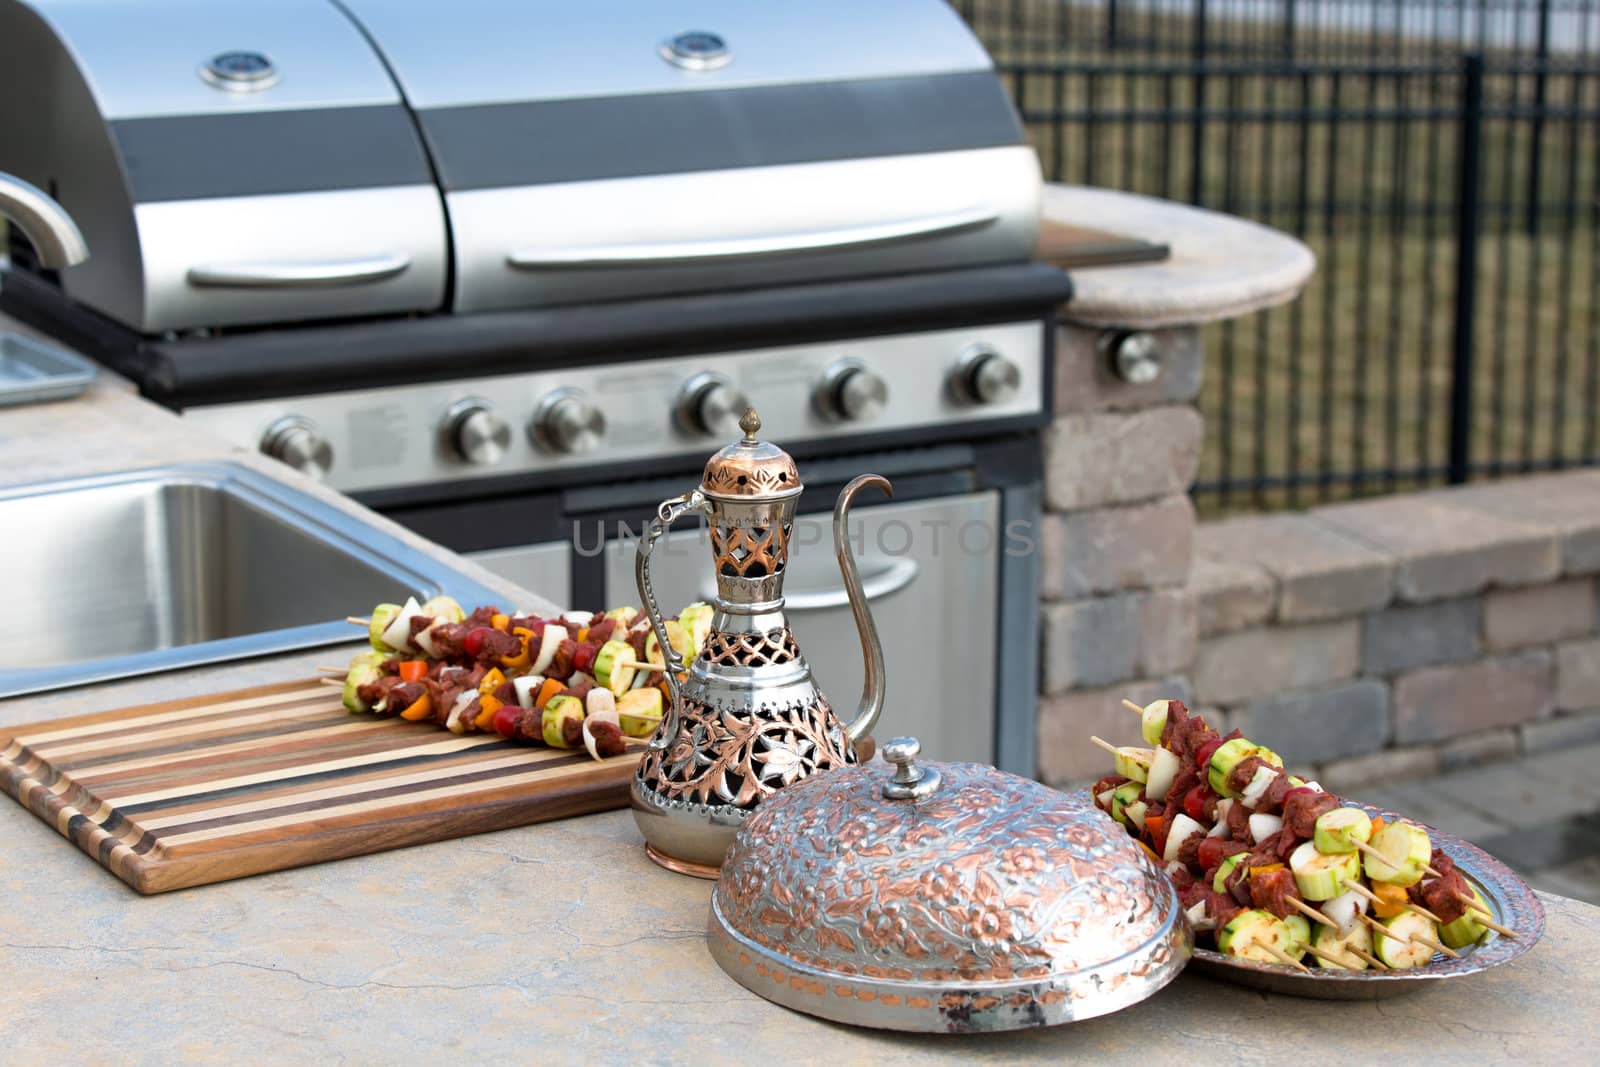 Skewers are in the traditional and authentic looking copper plate with complimenting pitcher. Meat skewers with vegetables at the outdoor kitchen on the concrete counter top.